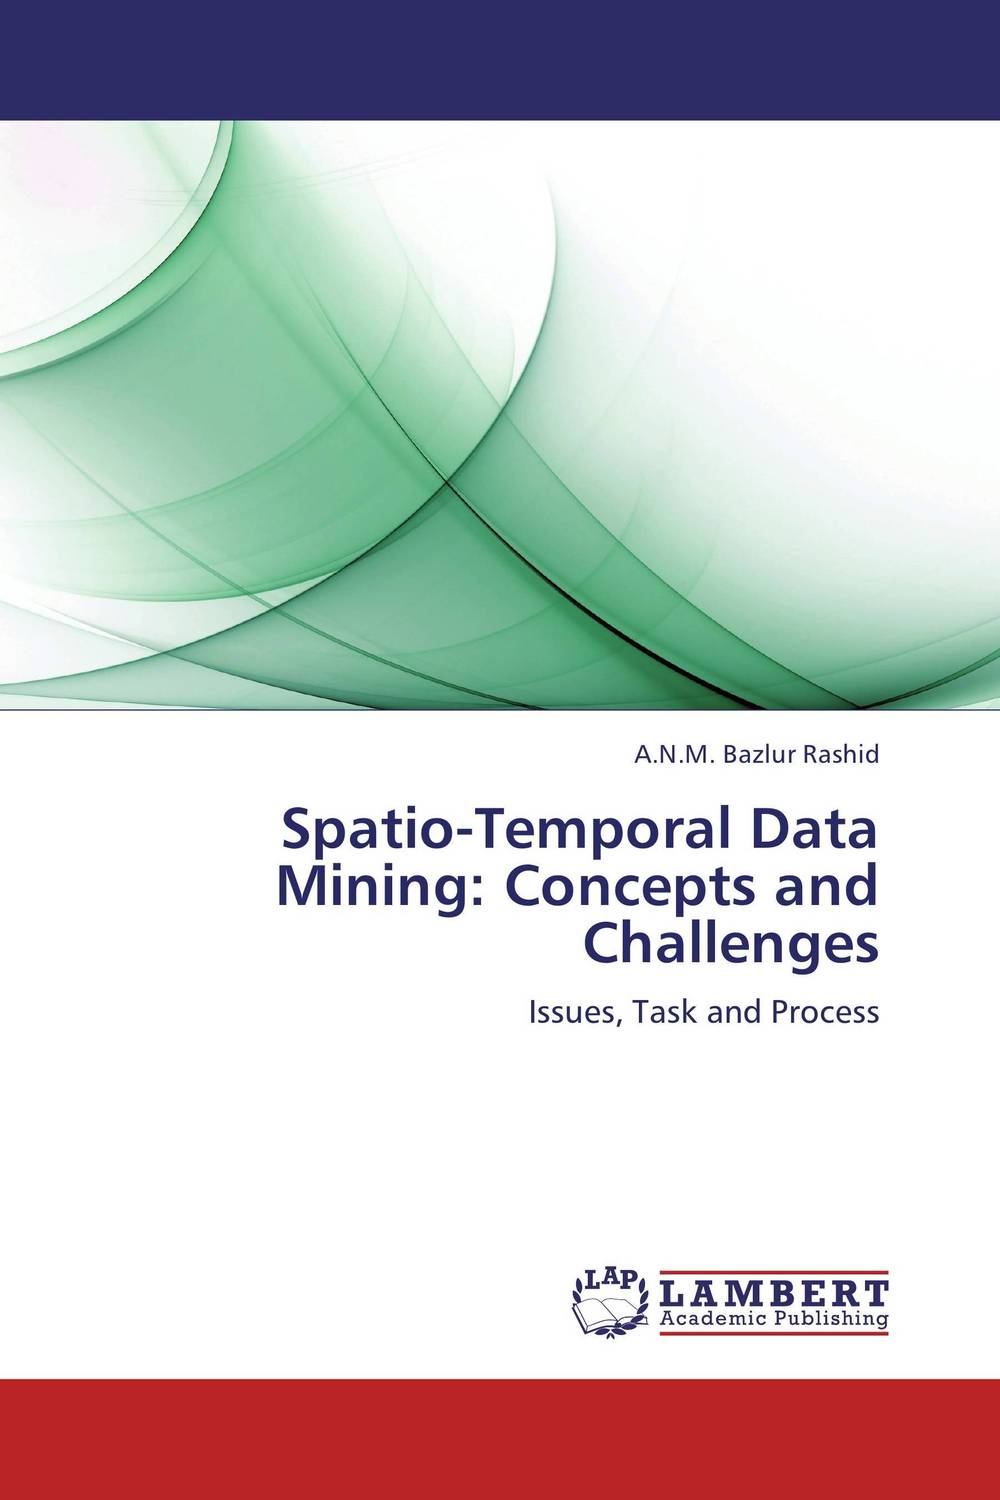 Spatio-Temporal Data Mining: Concepts and Challenges